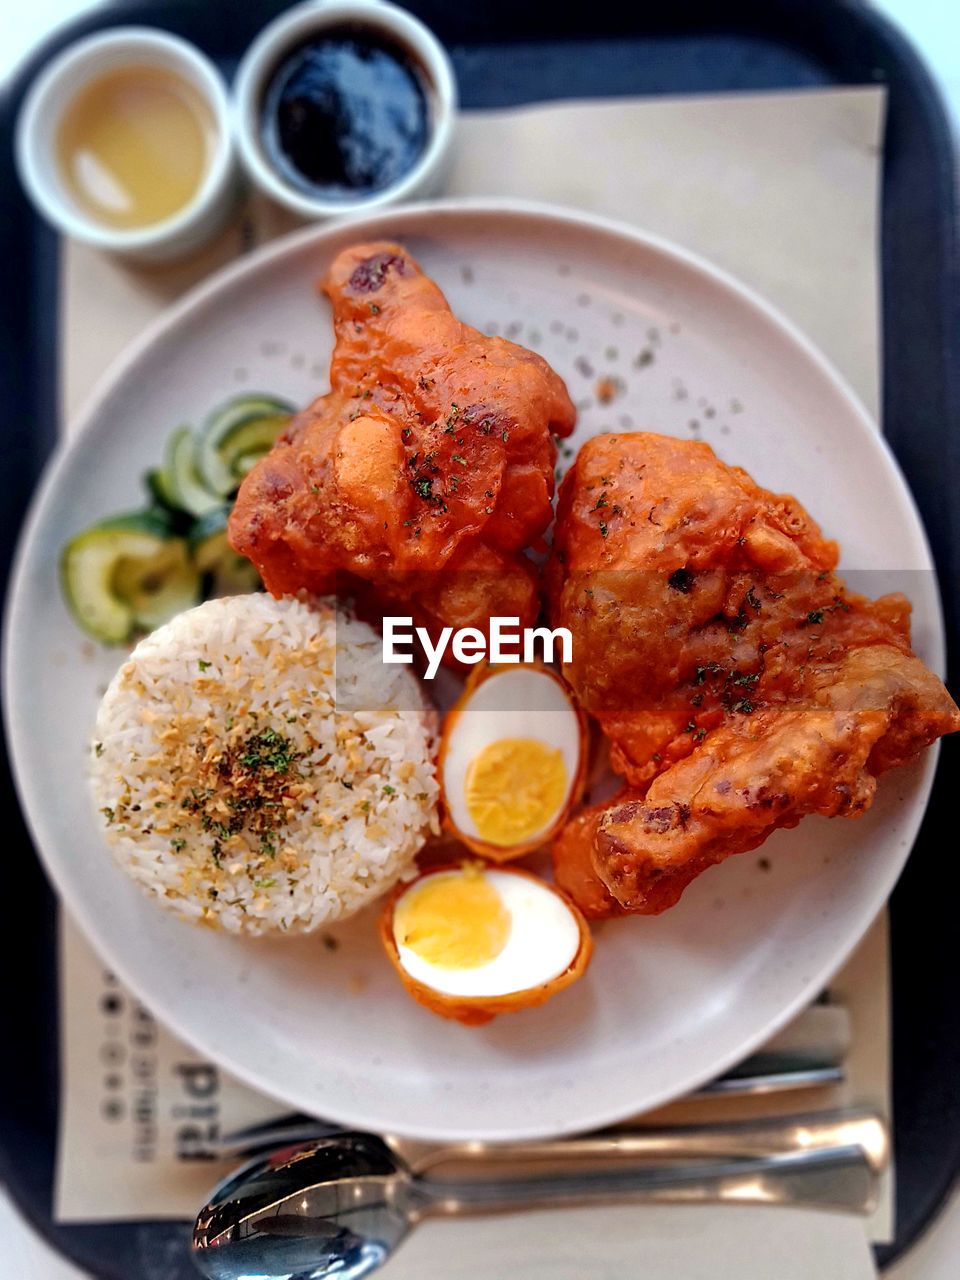 Top shot of fried chicken dish on tray